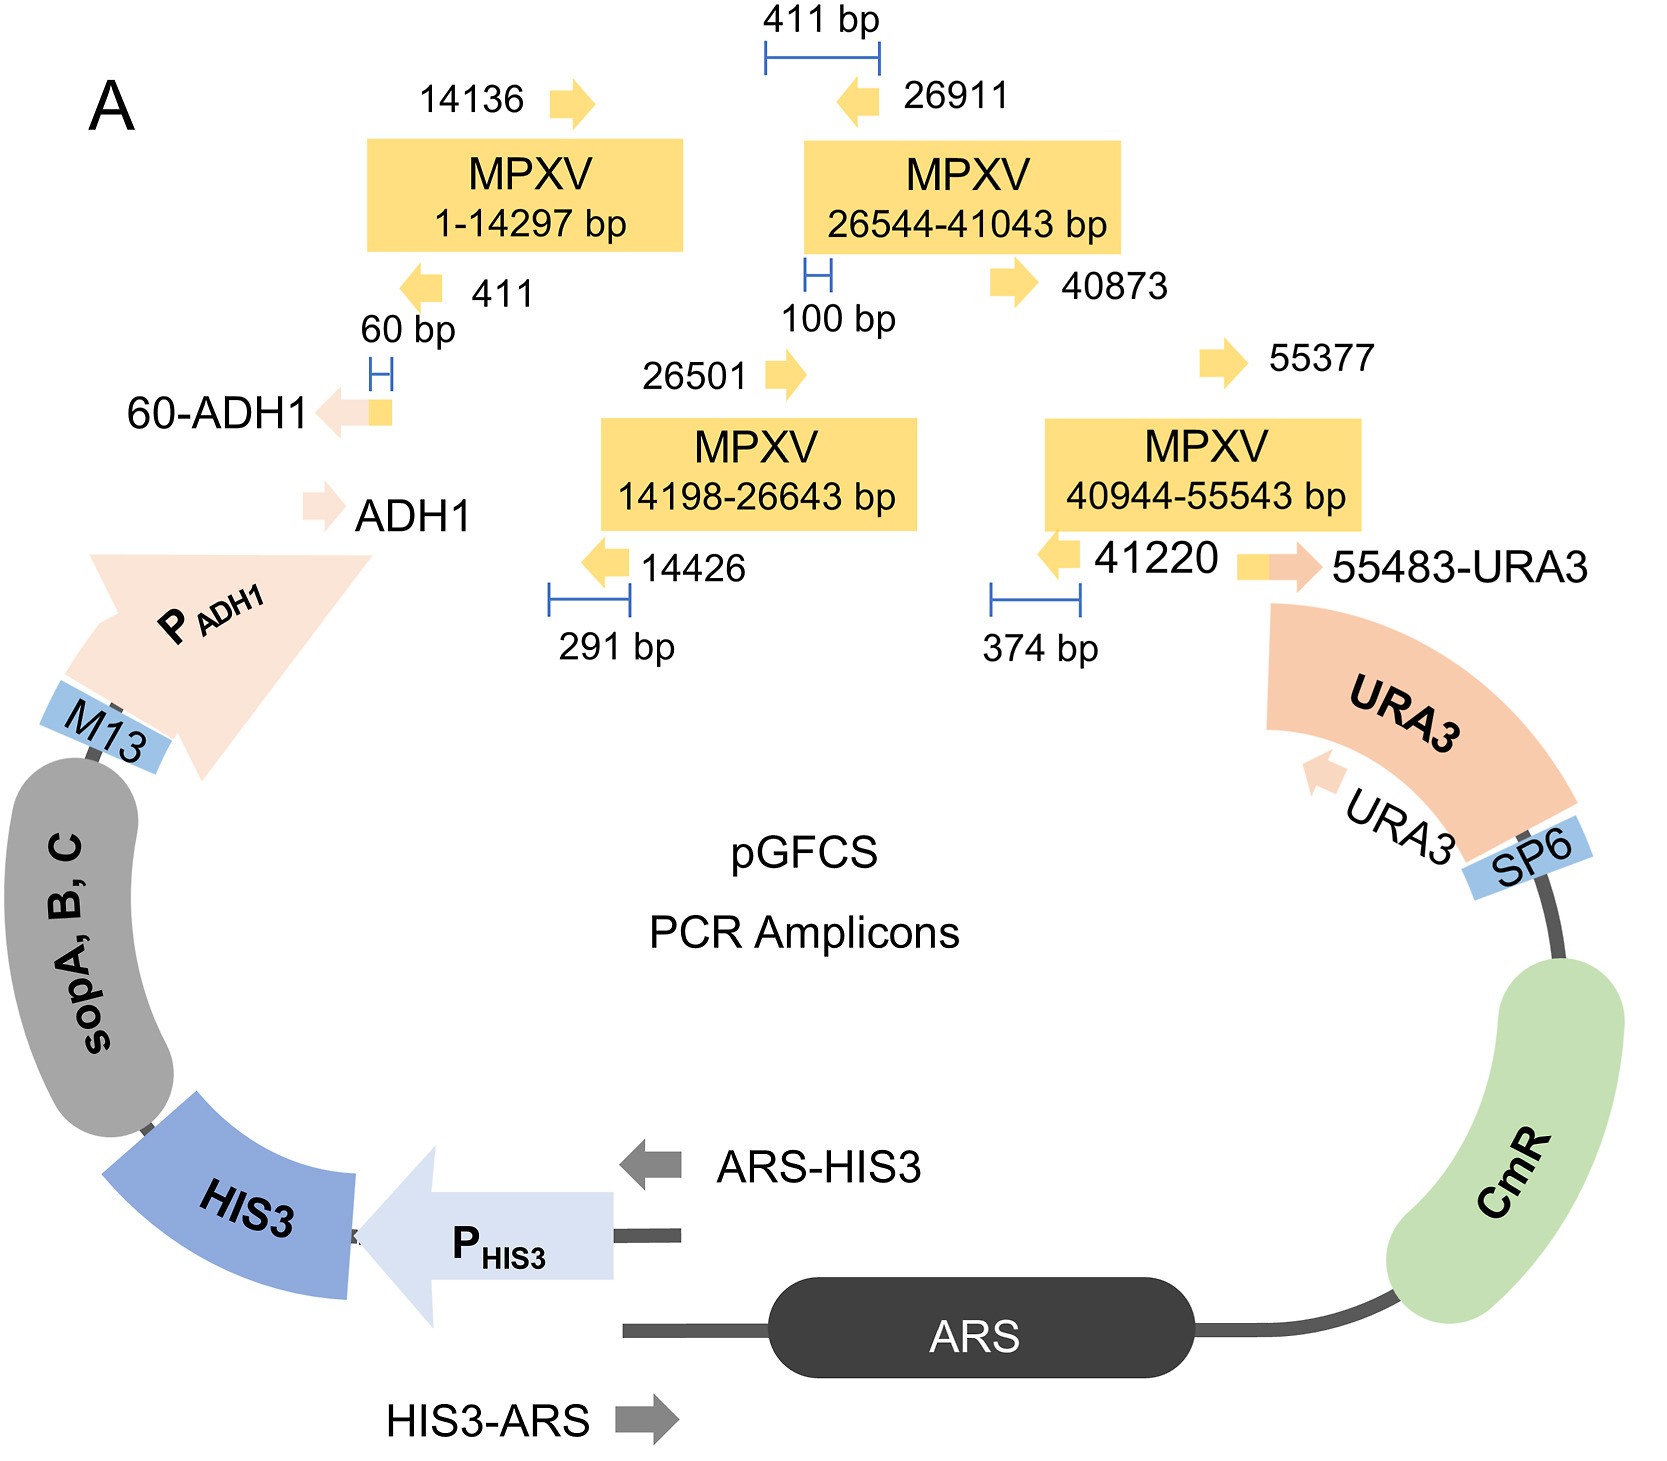 Efficient assembly of a large fragment of monkeypox virus genome as a qPCR template using dual-selection based transformation-associated recombination